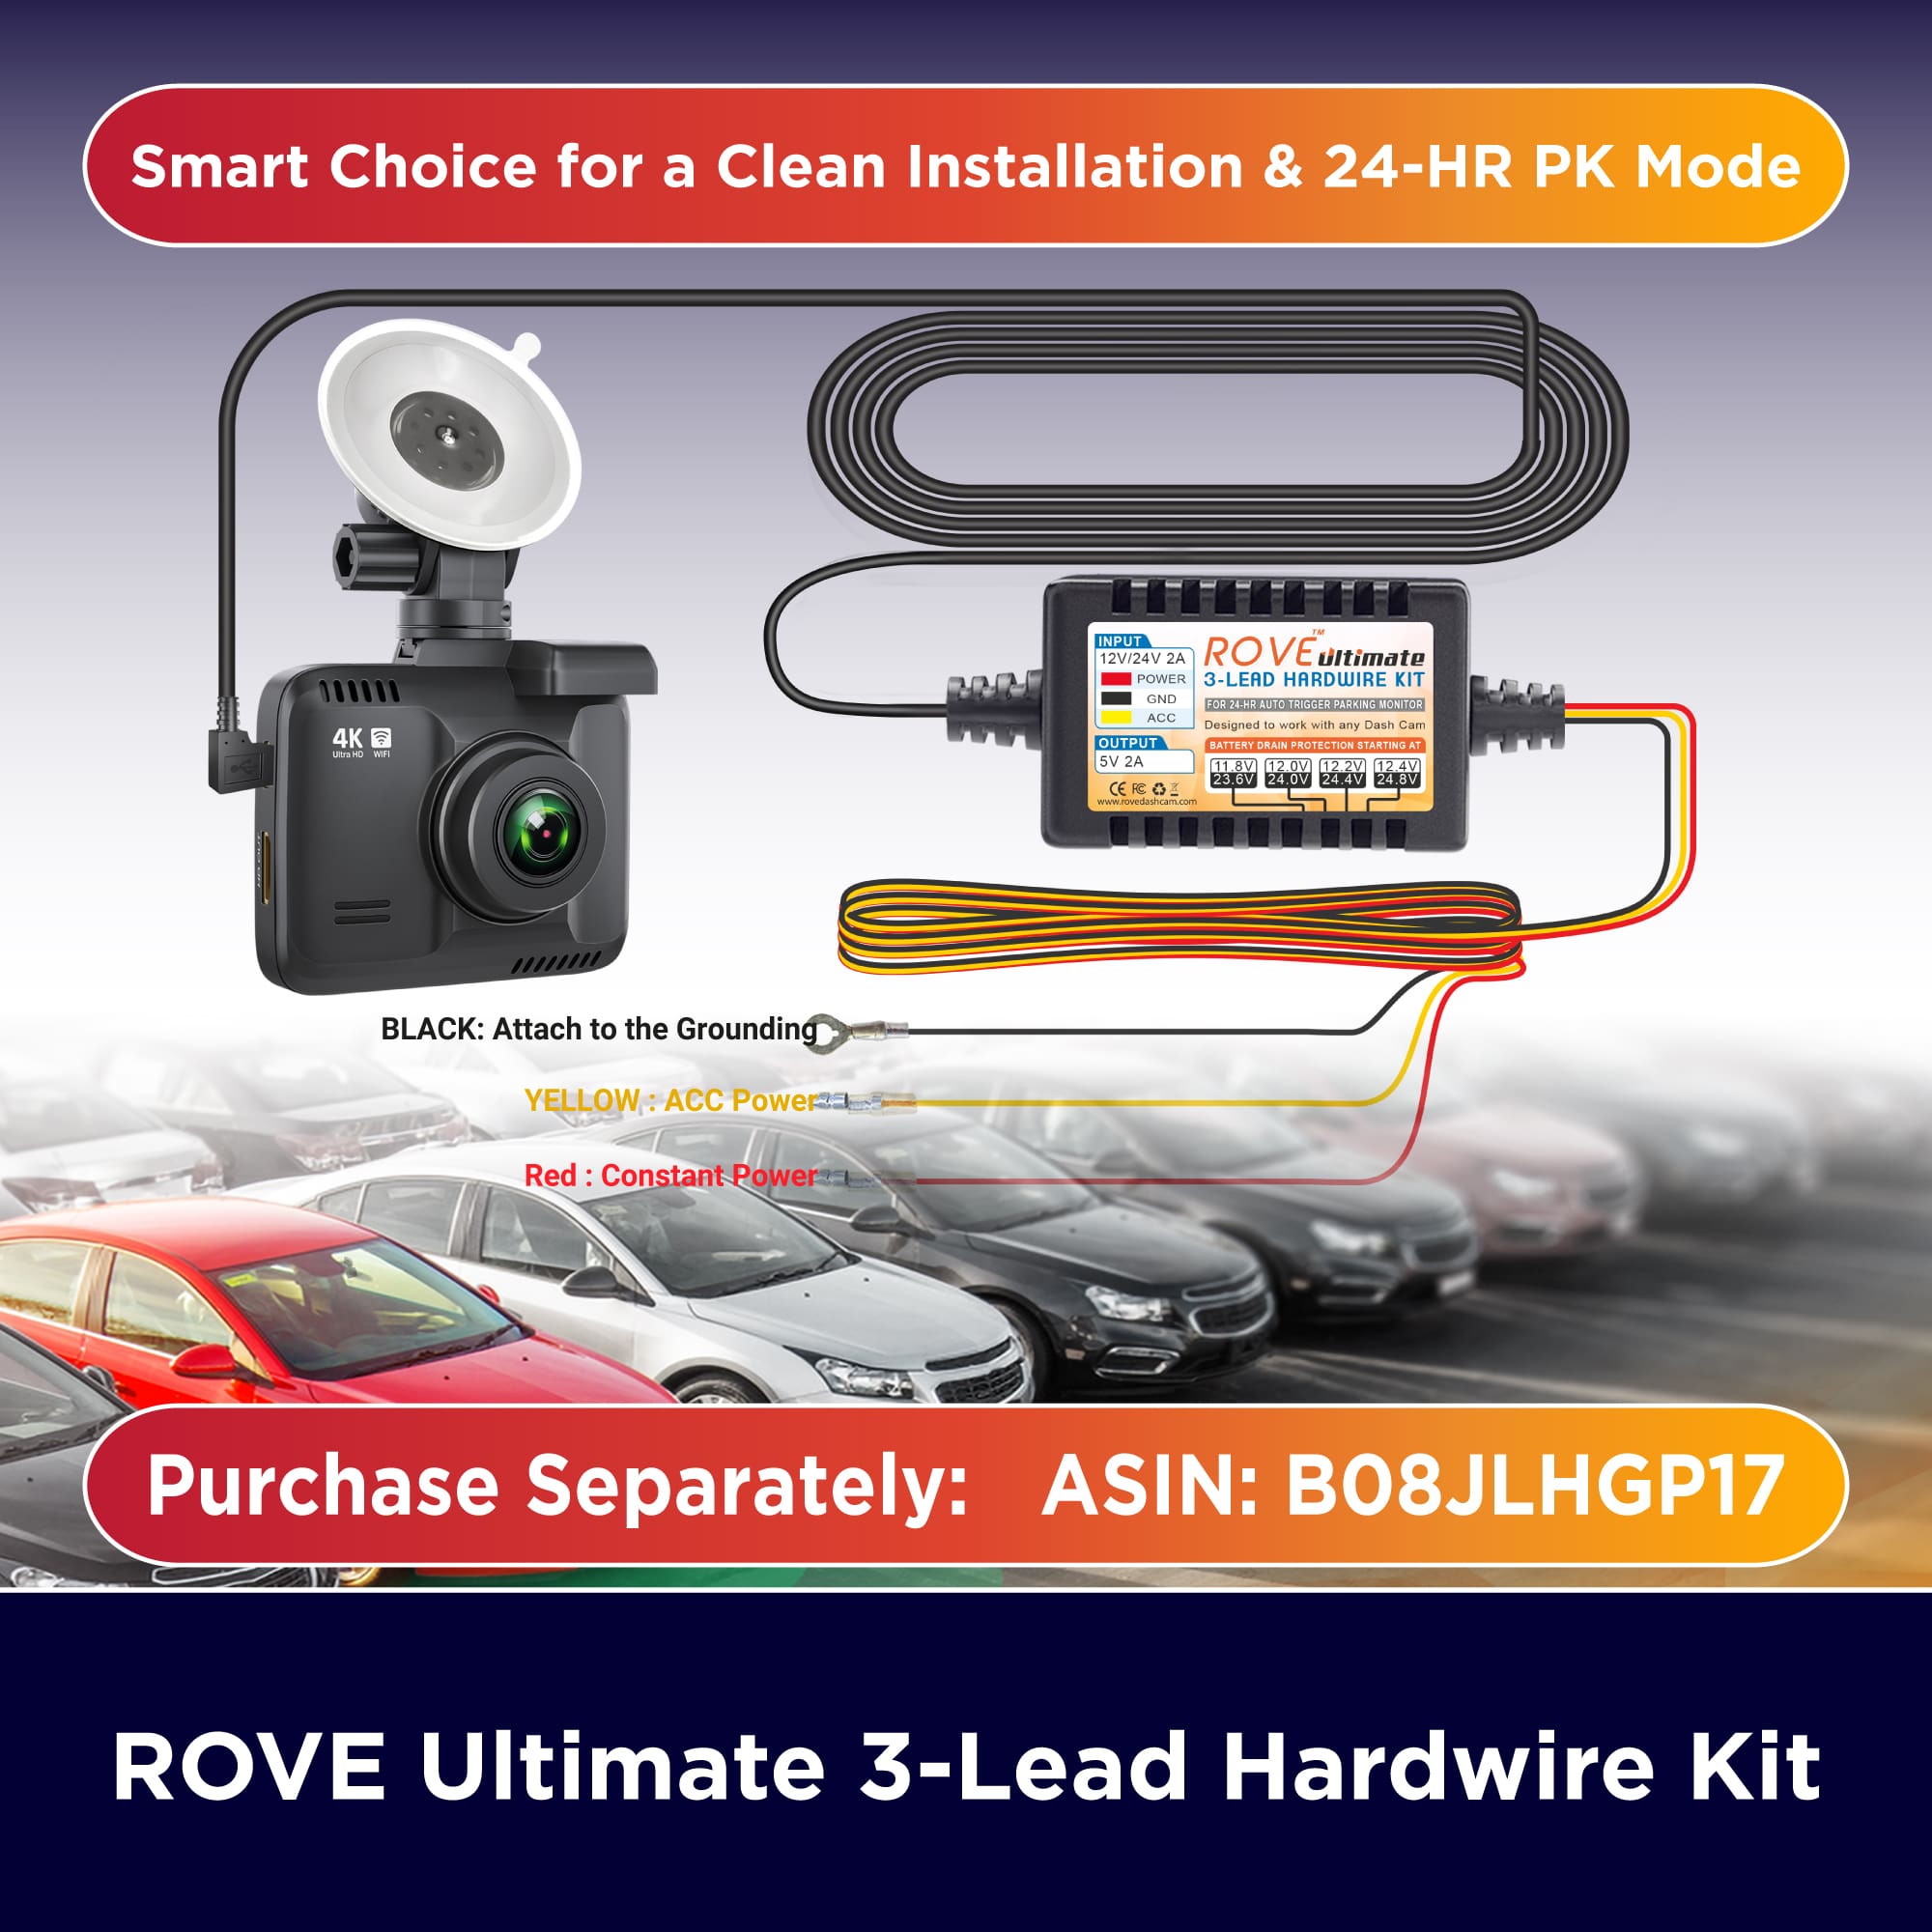 Keep Your Car Safe With the Rove R2-4K Dash Cam for Just $82